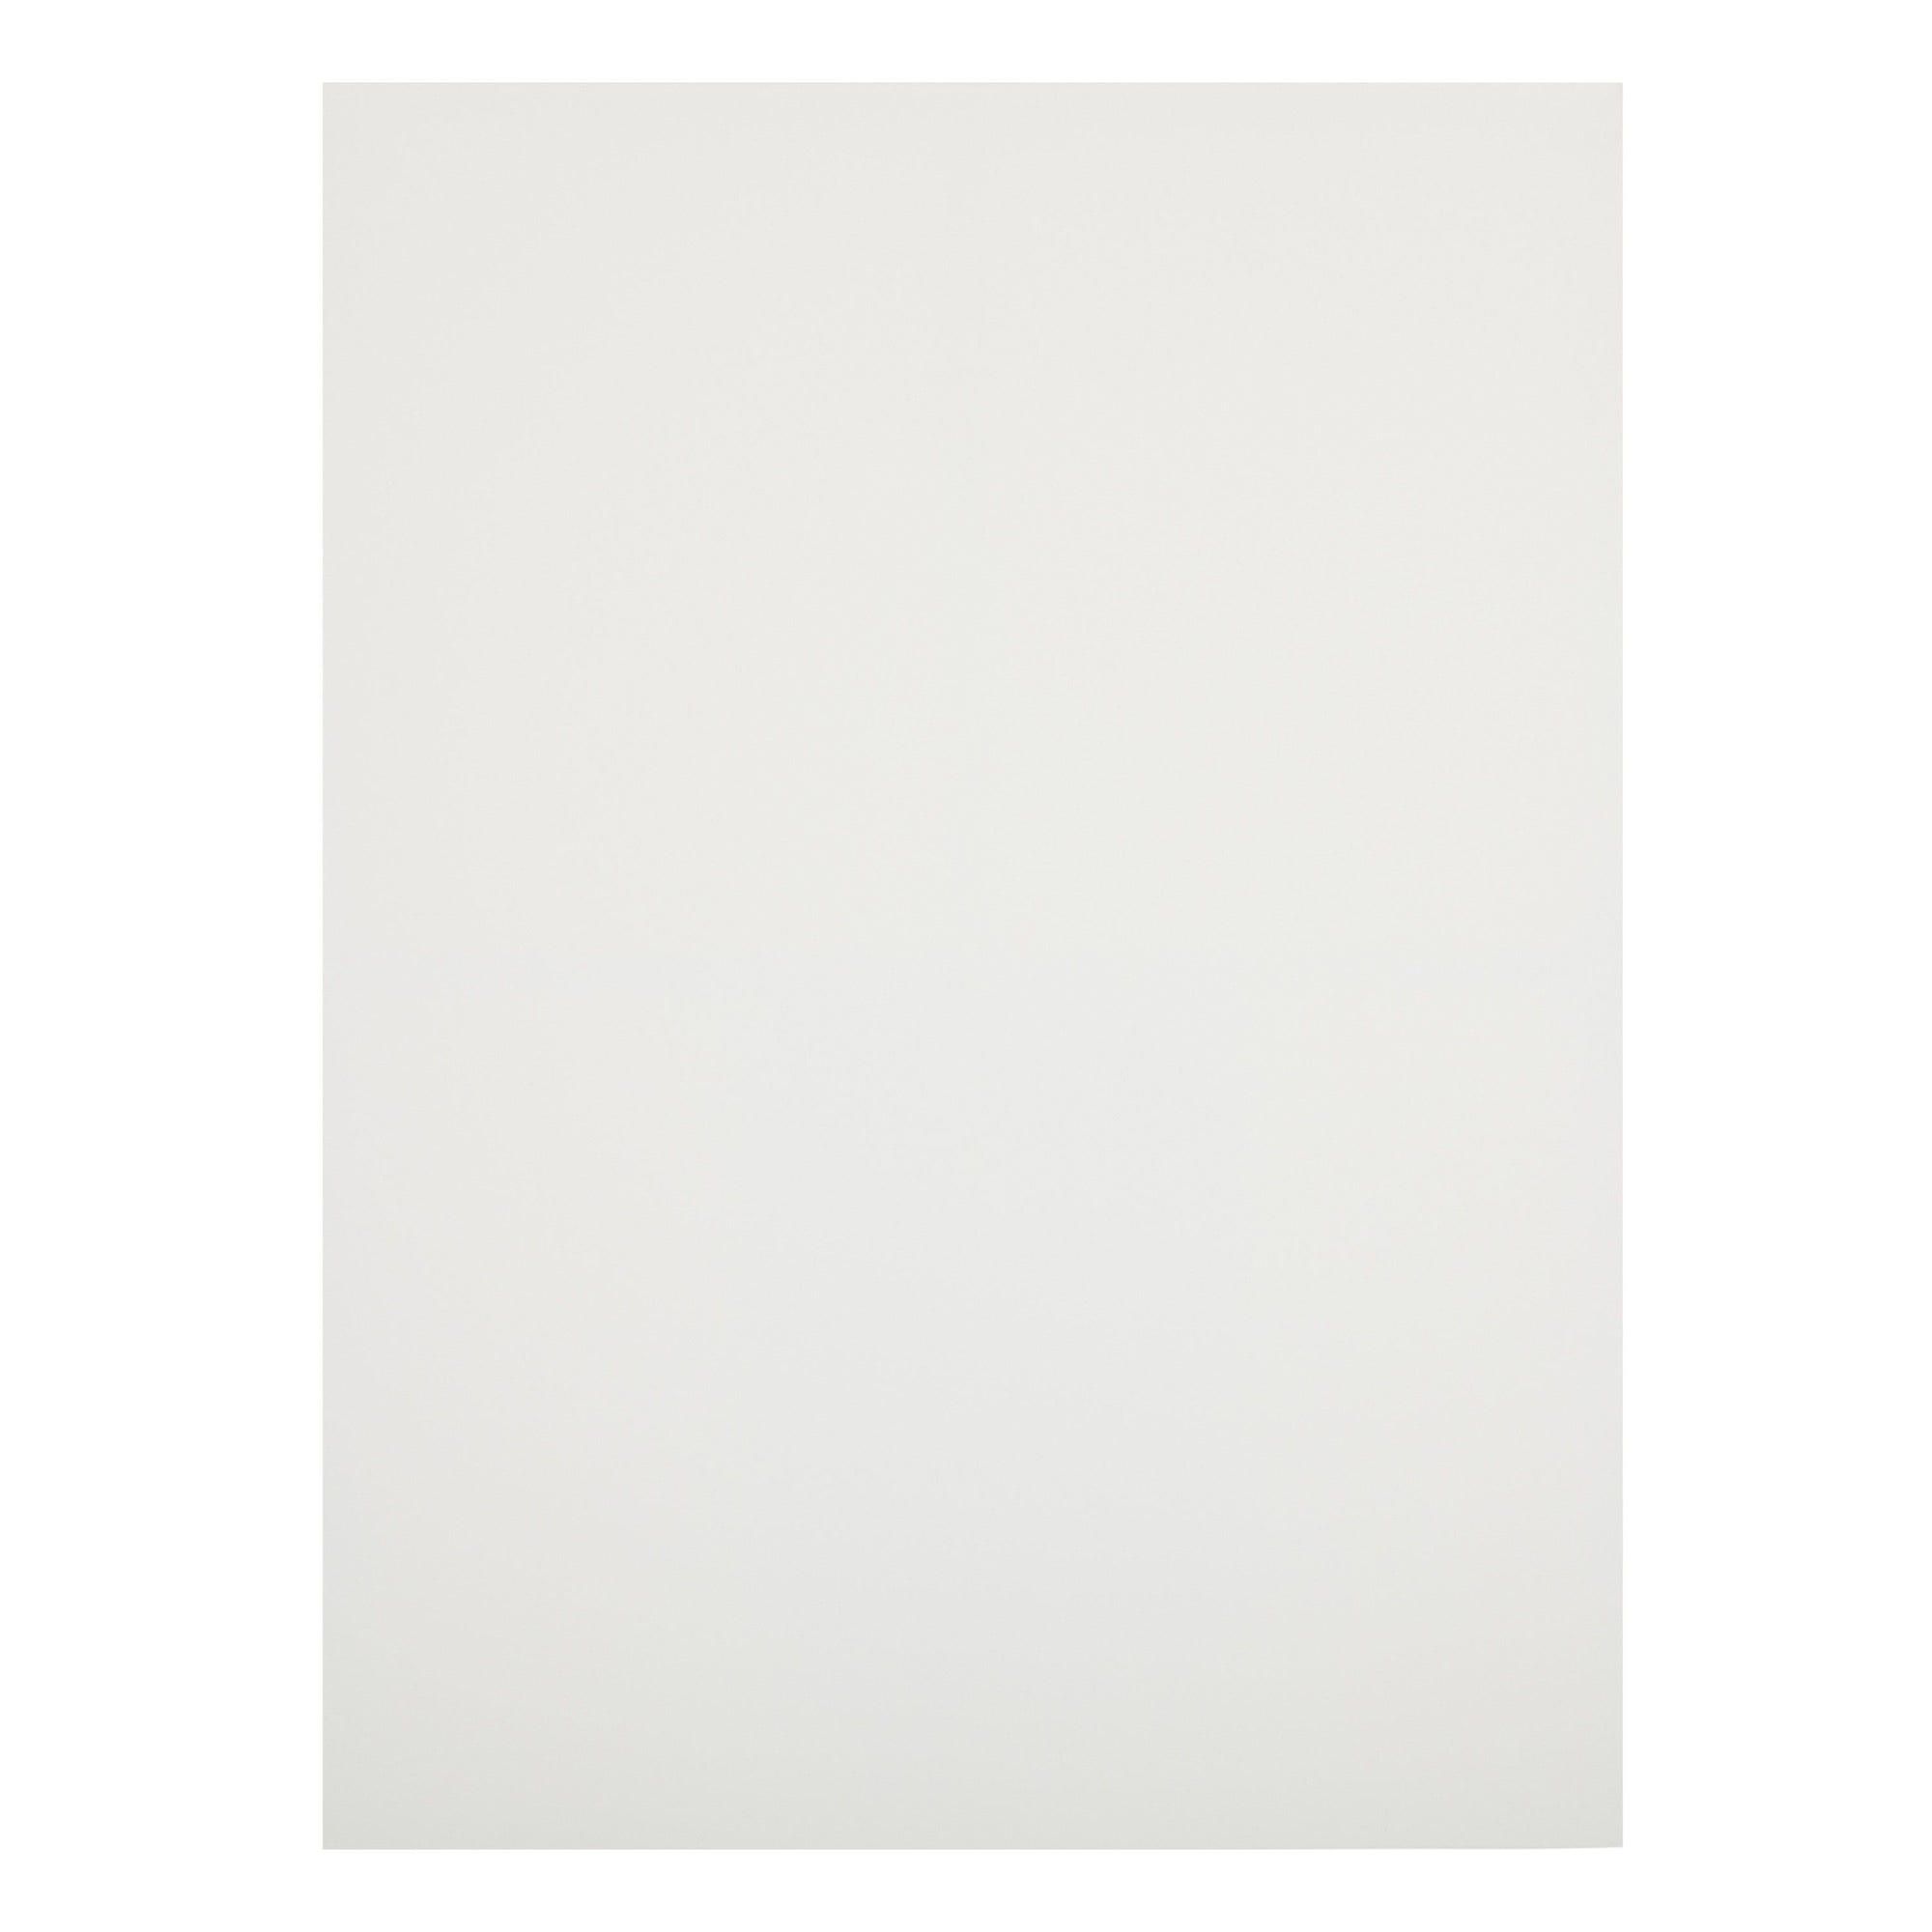 14-Pack Art Canvas, 10x10-Inch Stretched White Canvas Panel, 3mm